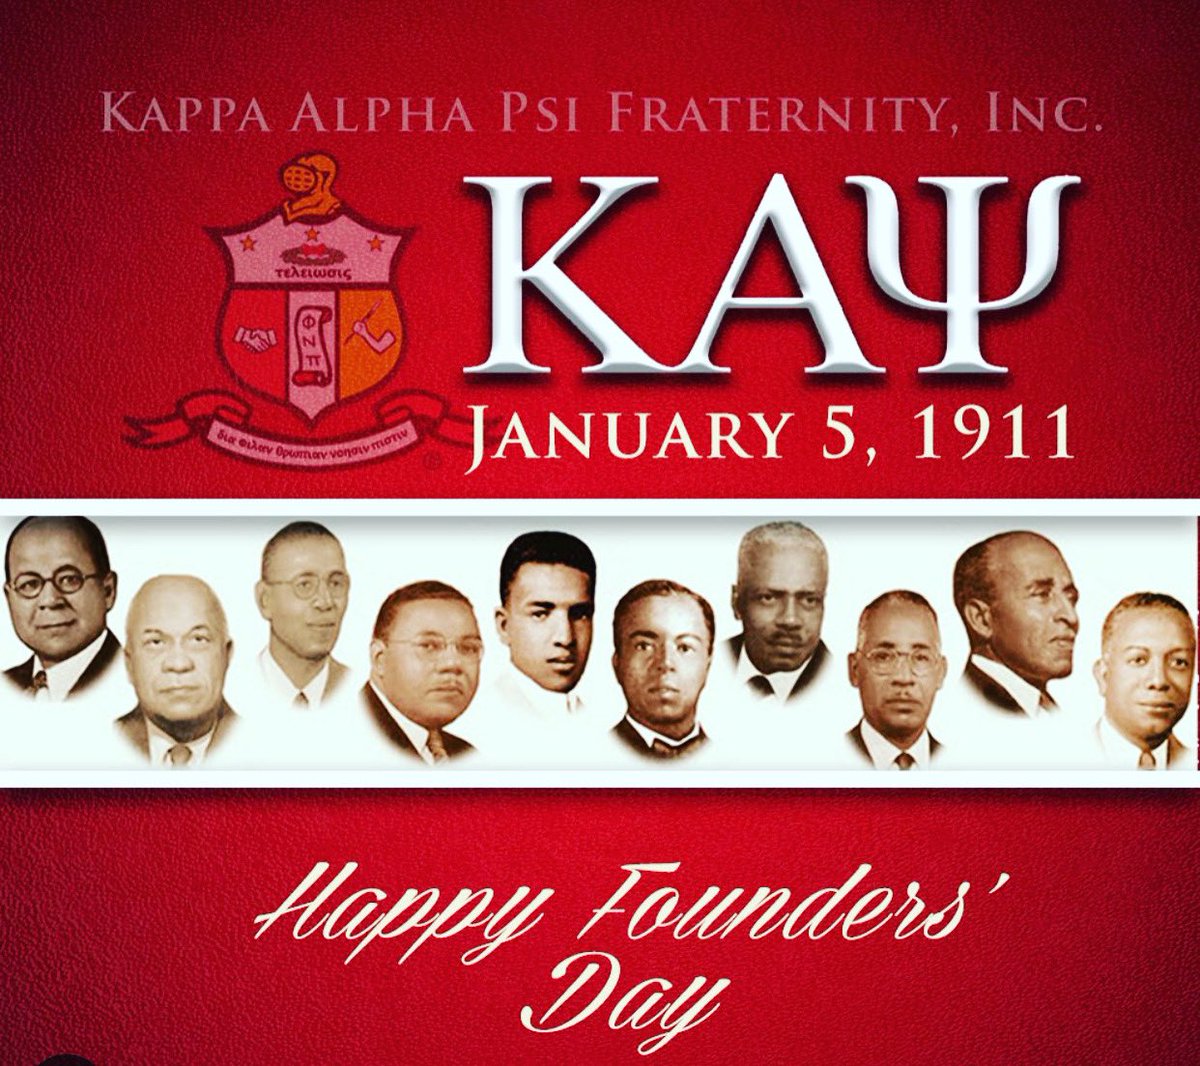 Happy Founders’ Day to the Men of Kappa Alpha Psi Fraternity, Inc. on on January 5, 1911 at Indiana University Bloomington. #καψ #φνπ #kappaalphapsi #foundersday